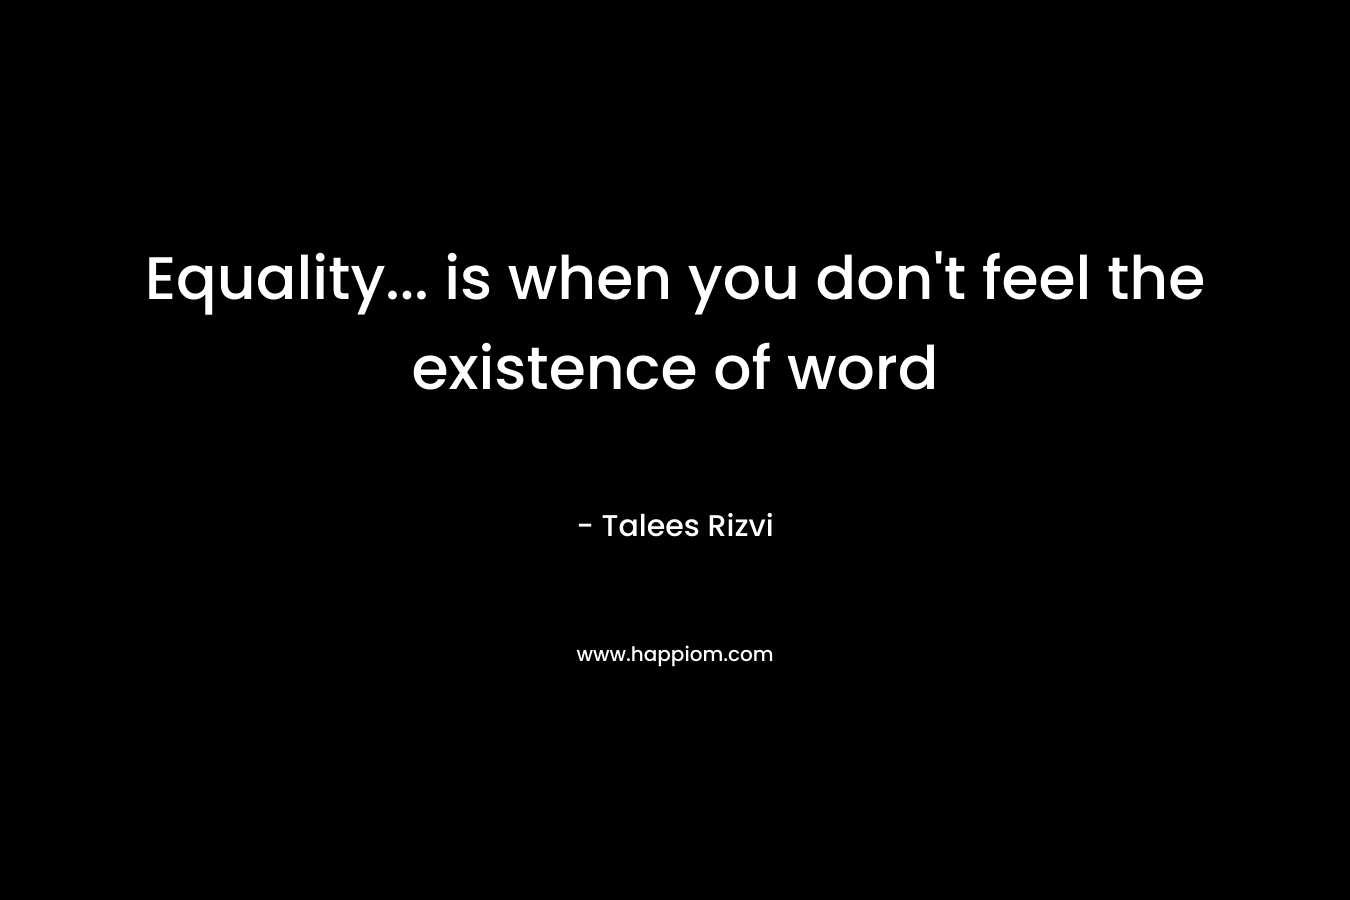 Equality... is when you don't feel the existence of word